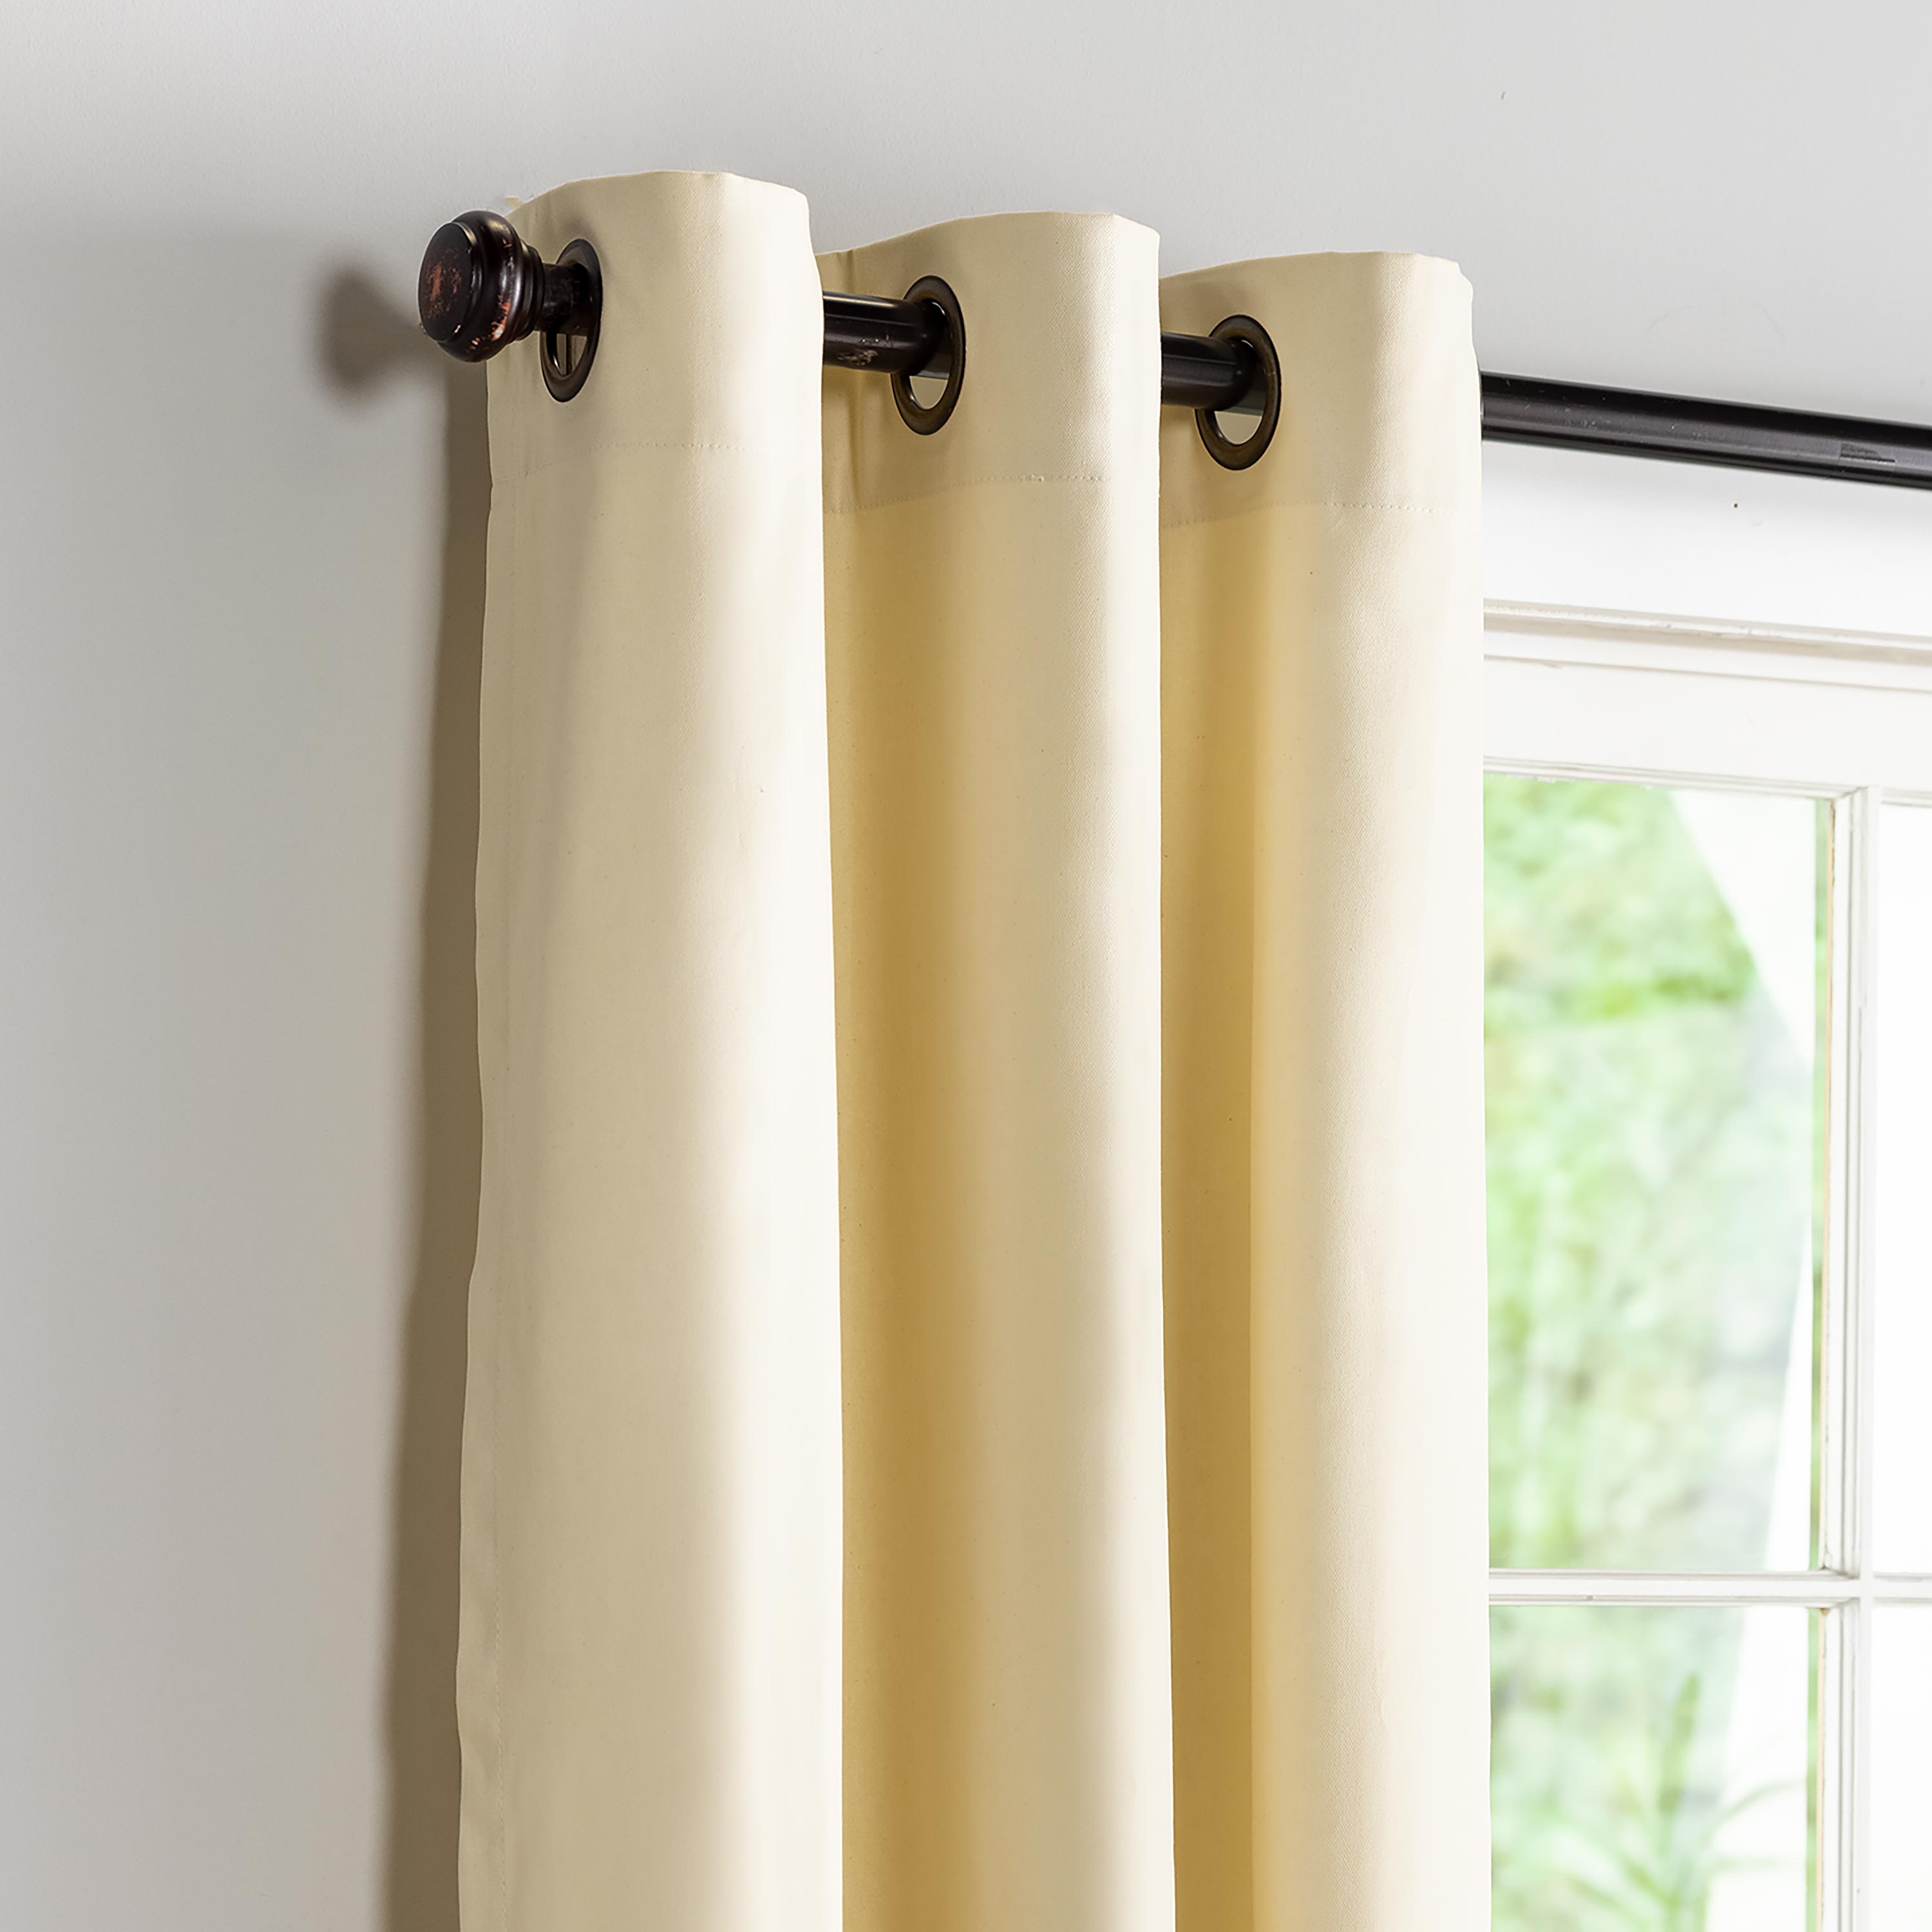 Buy Ram Kumar Hub Premium Plain Curtains for Living Room and Office for  Blackout Curtains (Set of 2 Piece) (CREAM-012, 4X9 FEET) Online at Low  Prices in India - Amazon.in